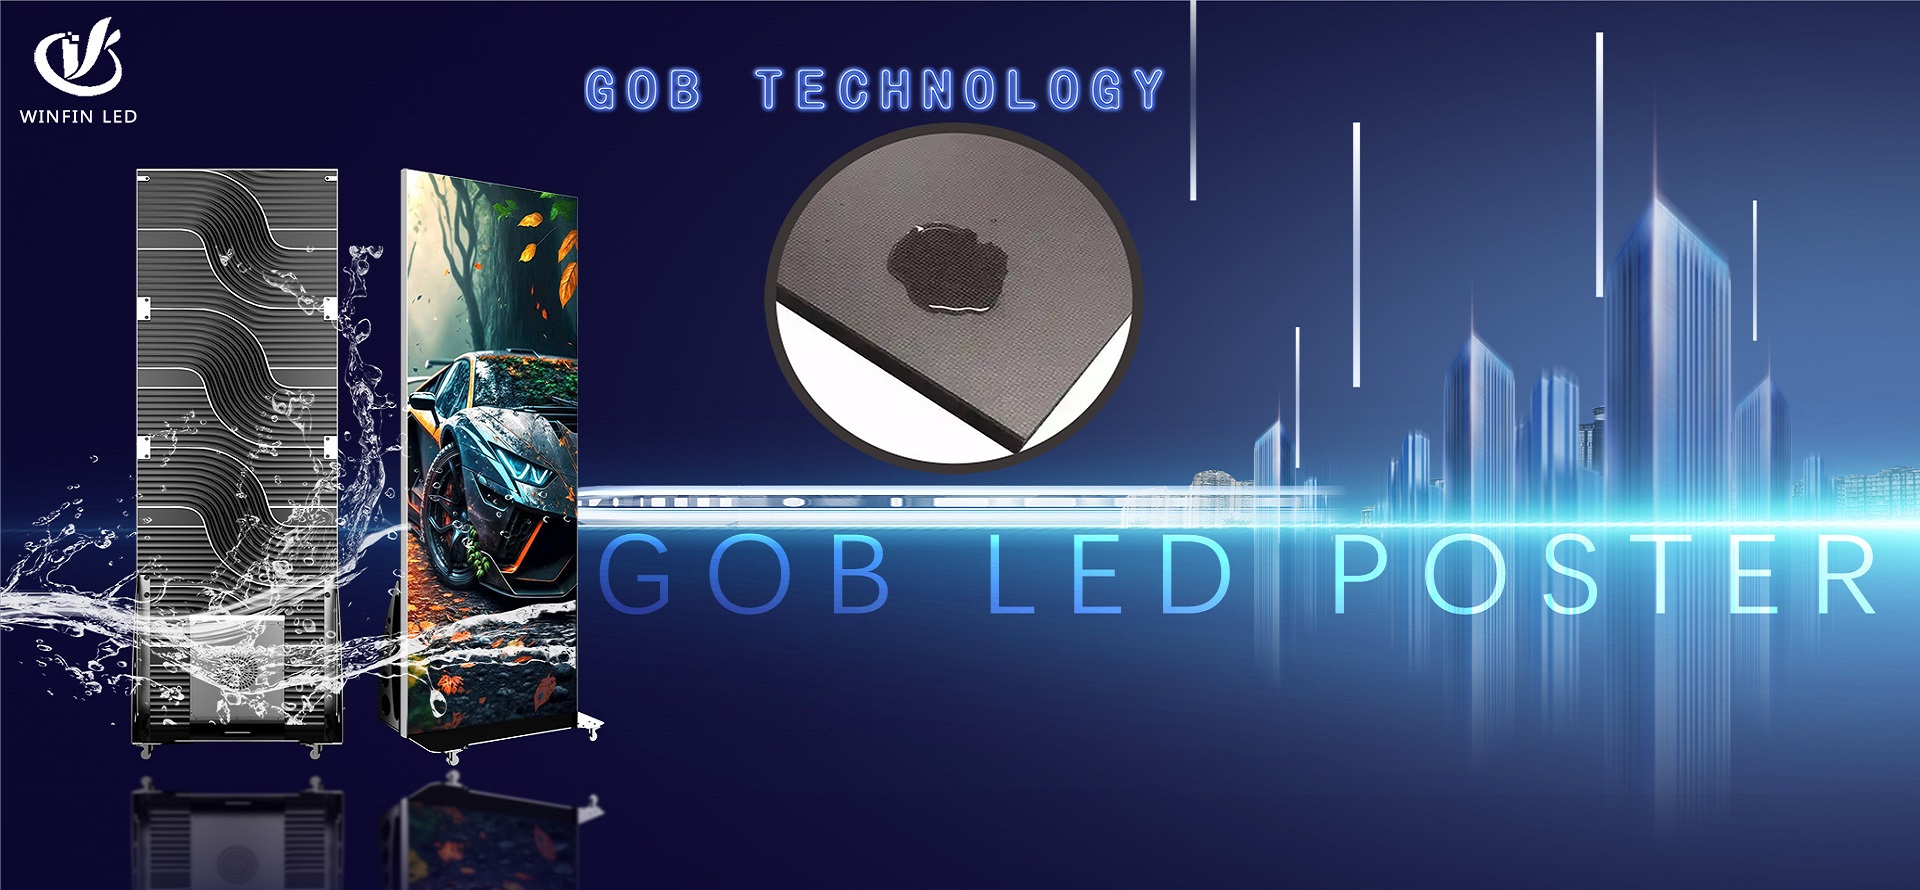 led poster screen